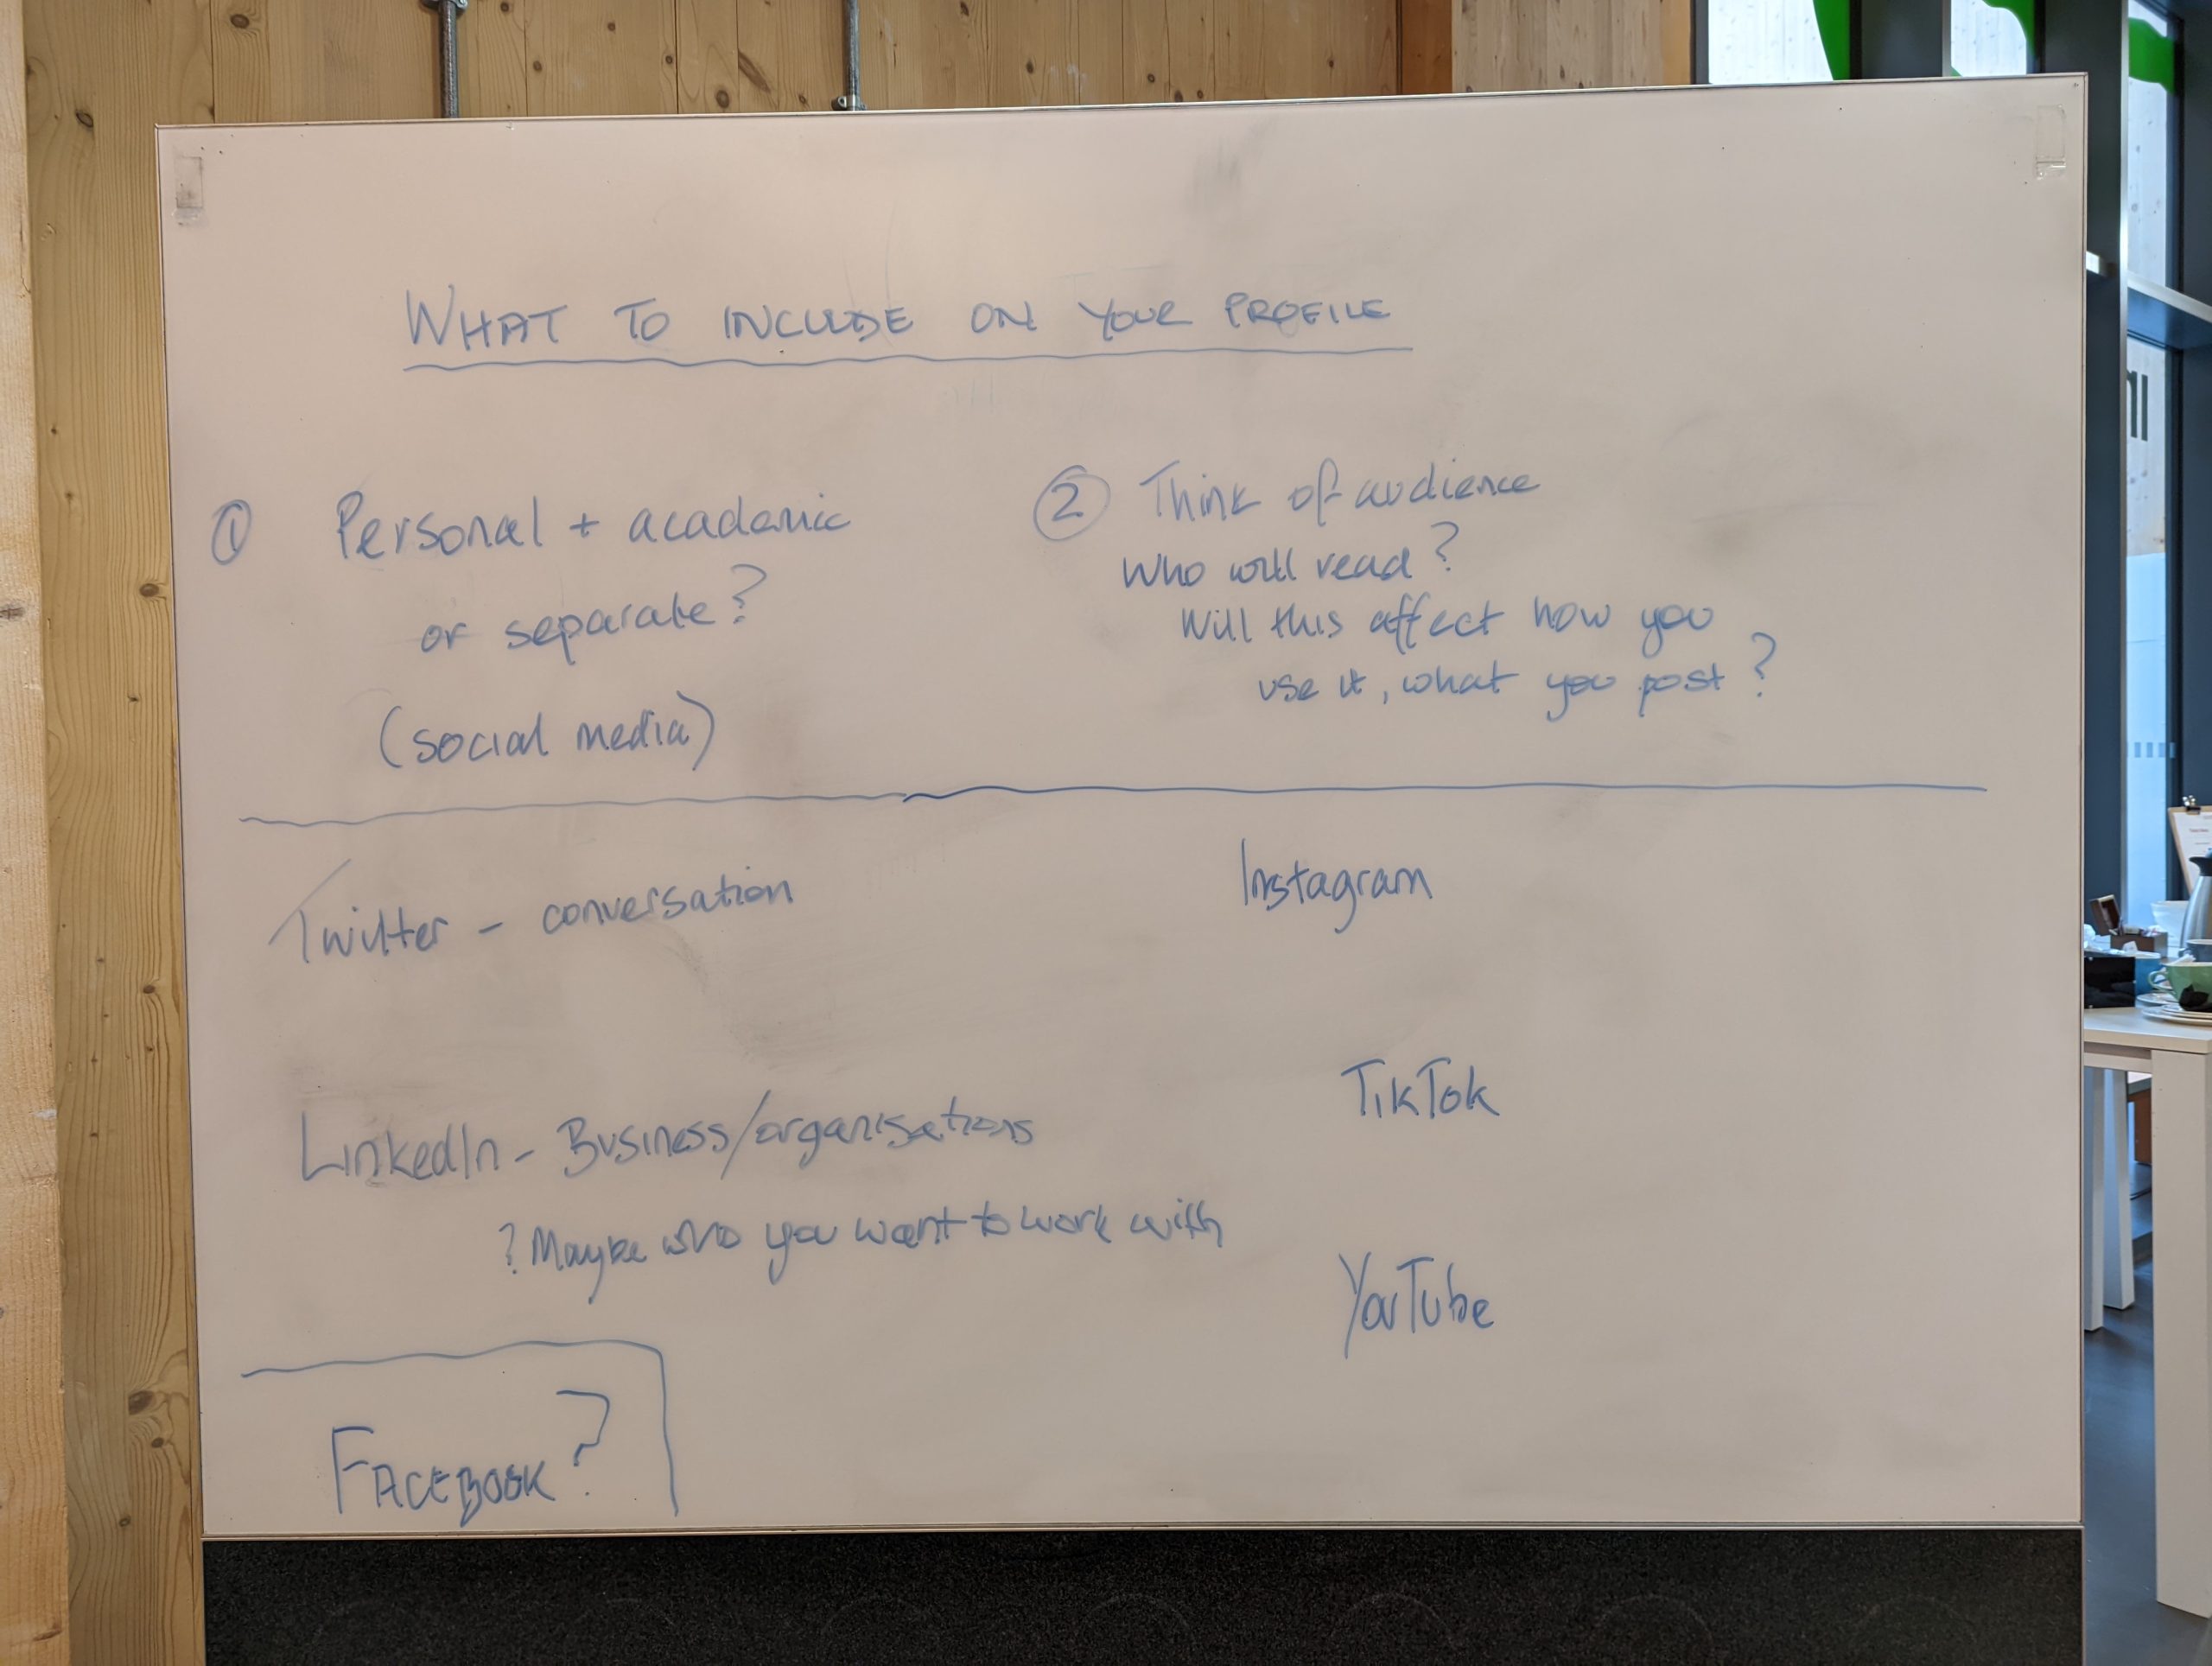 photo of whiteboard discussion notes